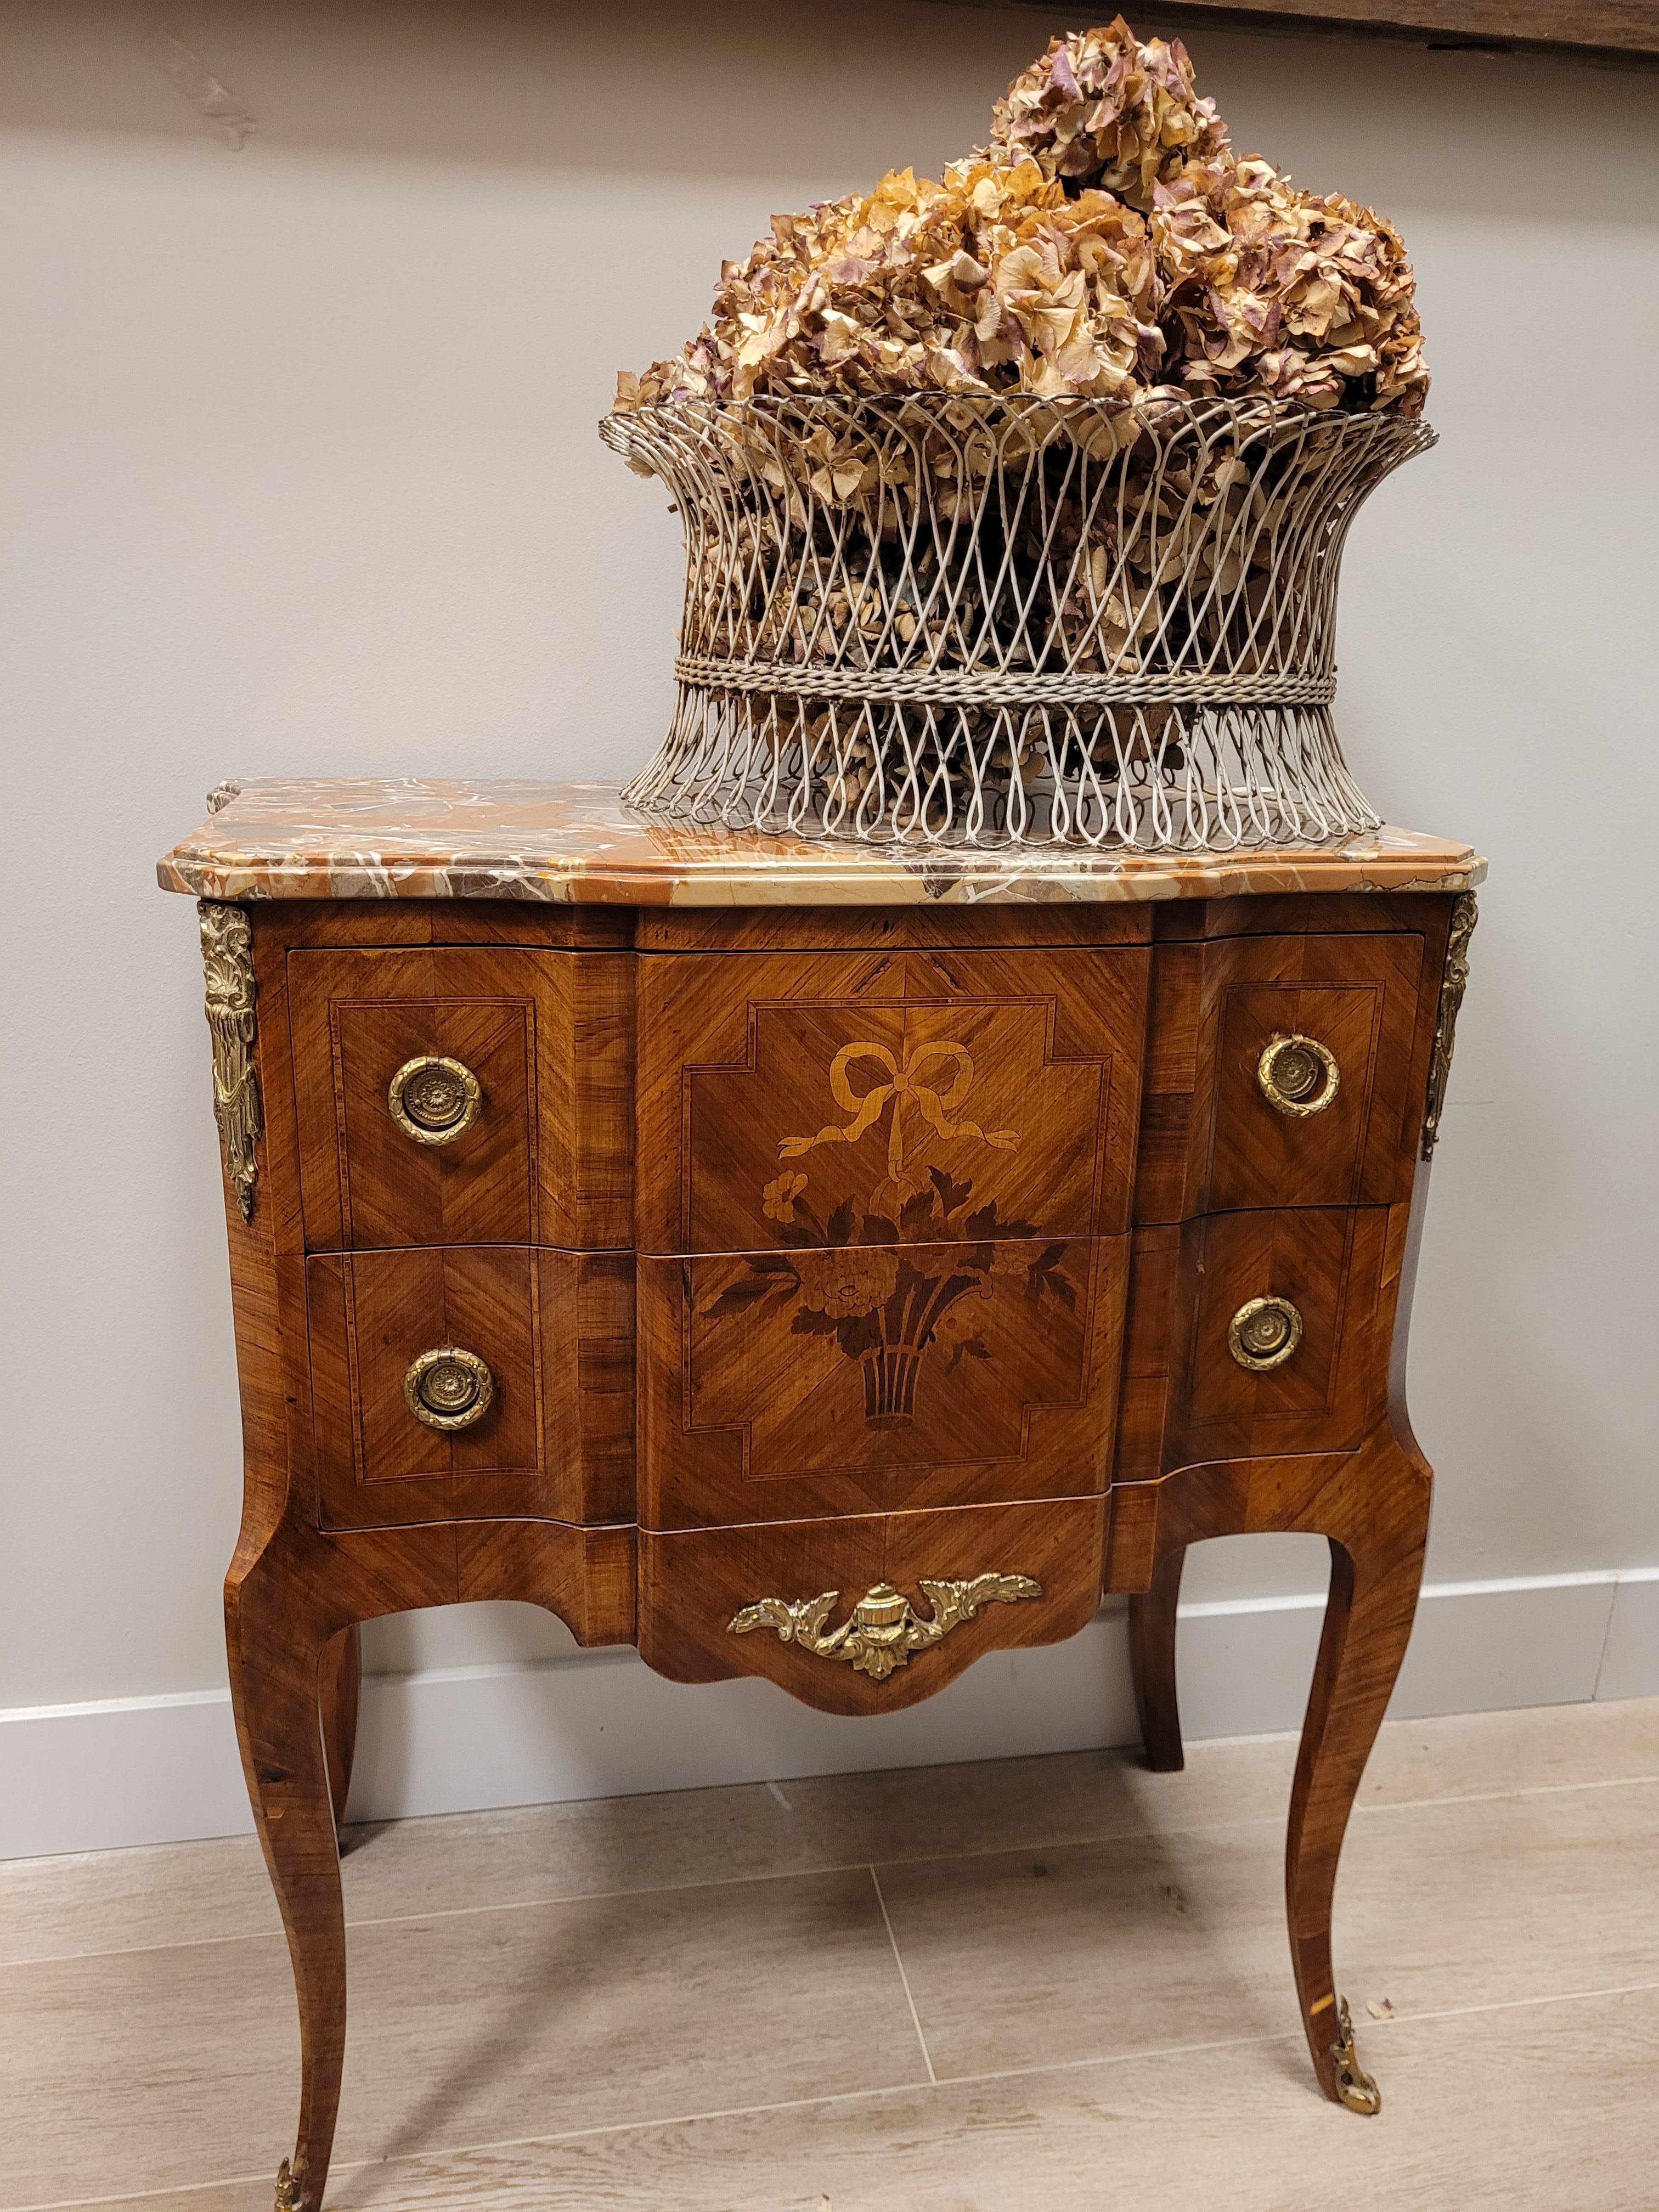 Gorgeous and very refined French chest of drawers or commode made around 1790 following the transitional style between Louis XV and Louis XVI, workshop Jean-Charles Ellaume. It has a delicate mixtilinear profile and galveate legs with sabots on the